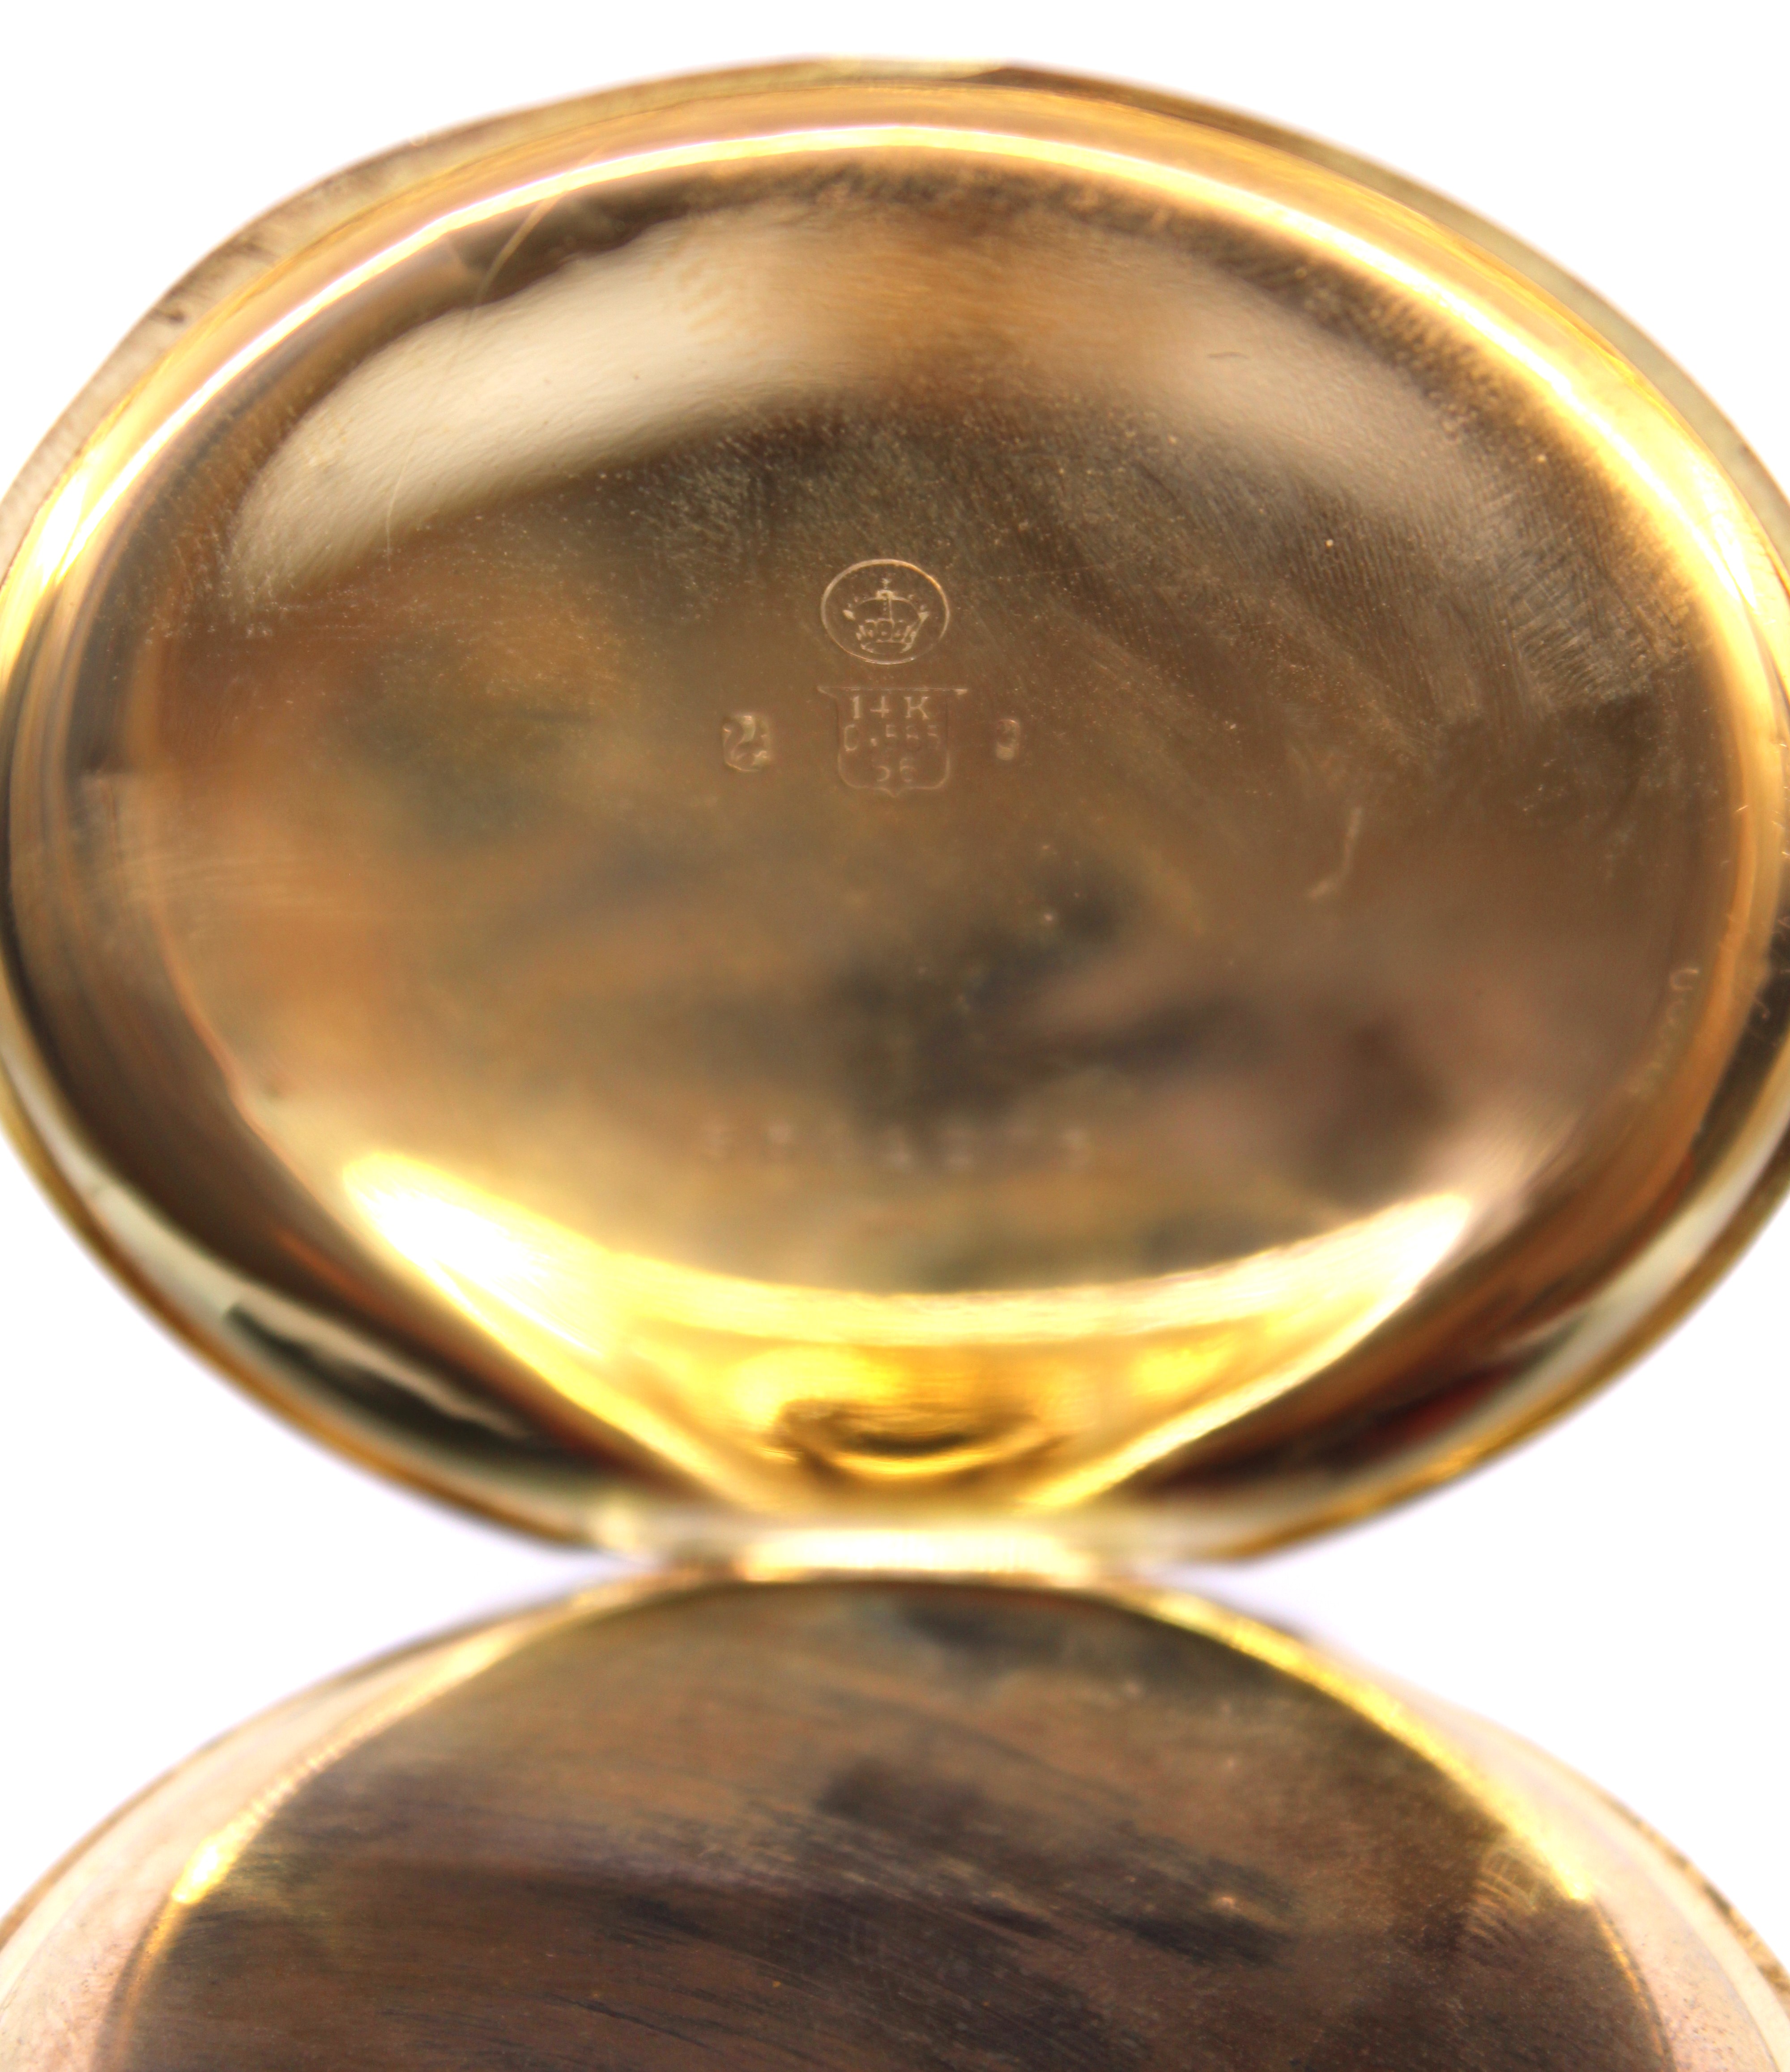 14ct Yellow Gold Pocket Watch. The Pocket Watch is hallmarked "14K" and "0,585" for 14ct Gold on the - Image 3 of 3